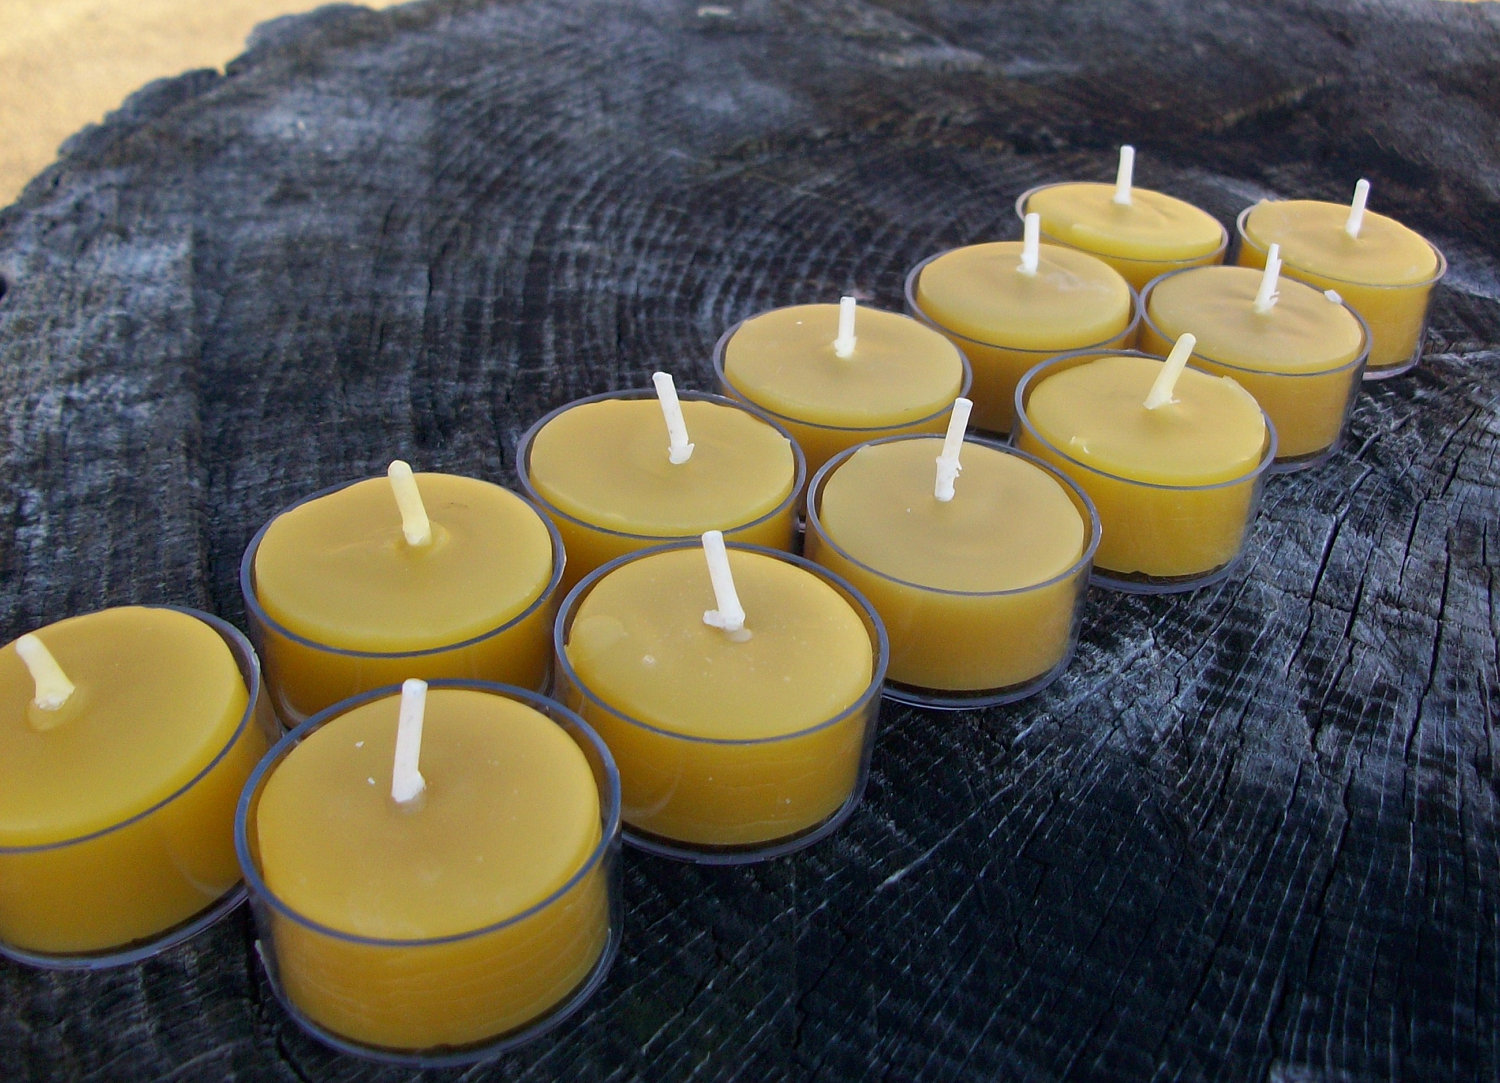 100% All Natural Bees Wax Tealight Beeswax Refill Candles BULK Small Allergy Friendly Clean Burning Cotton Wick Candle Cups Refills USA